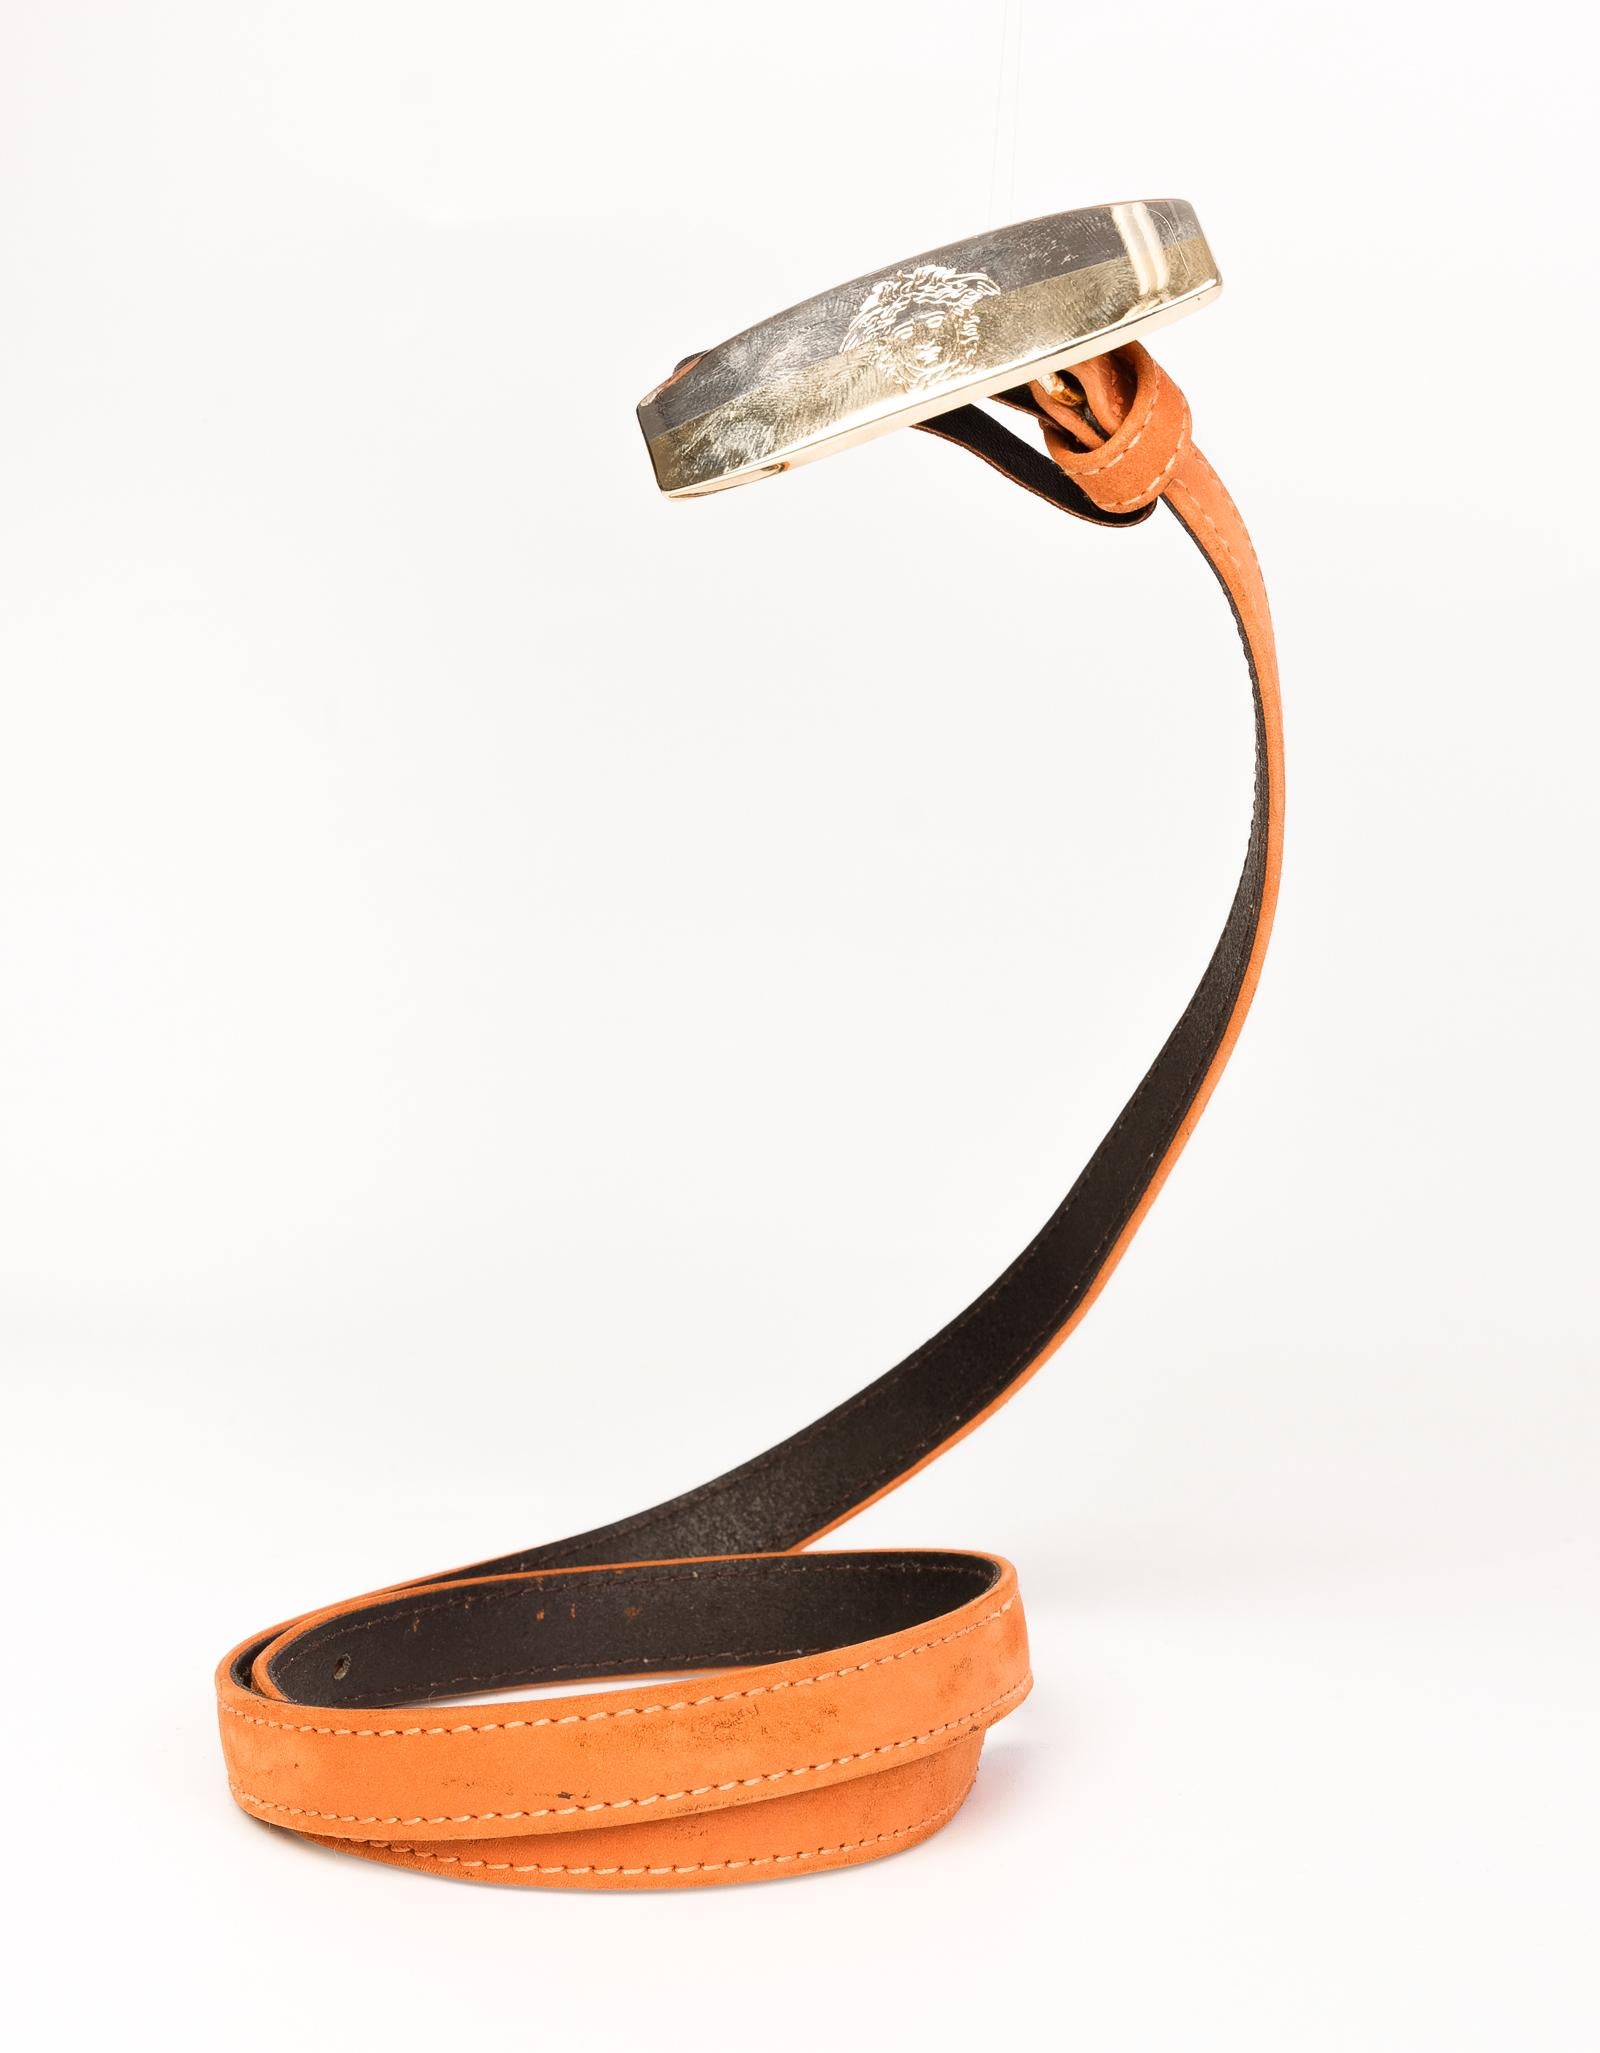 Versace thin orange leather belt with a plain gold and silver tone front hardware with the iconic Medusa head. 

COLOR: Orange
MATERIAL: Leather
ITEM CODE: D 5033 NB1
MEASURES: L 30” x W .5”
SIZE: 65/26
CONDITION: Very good  -  small signs of wear